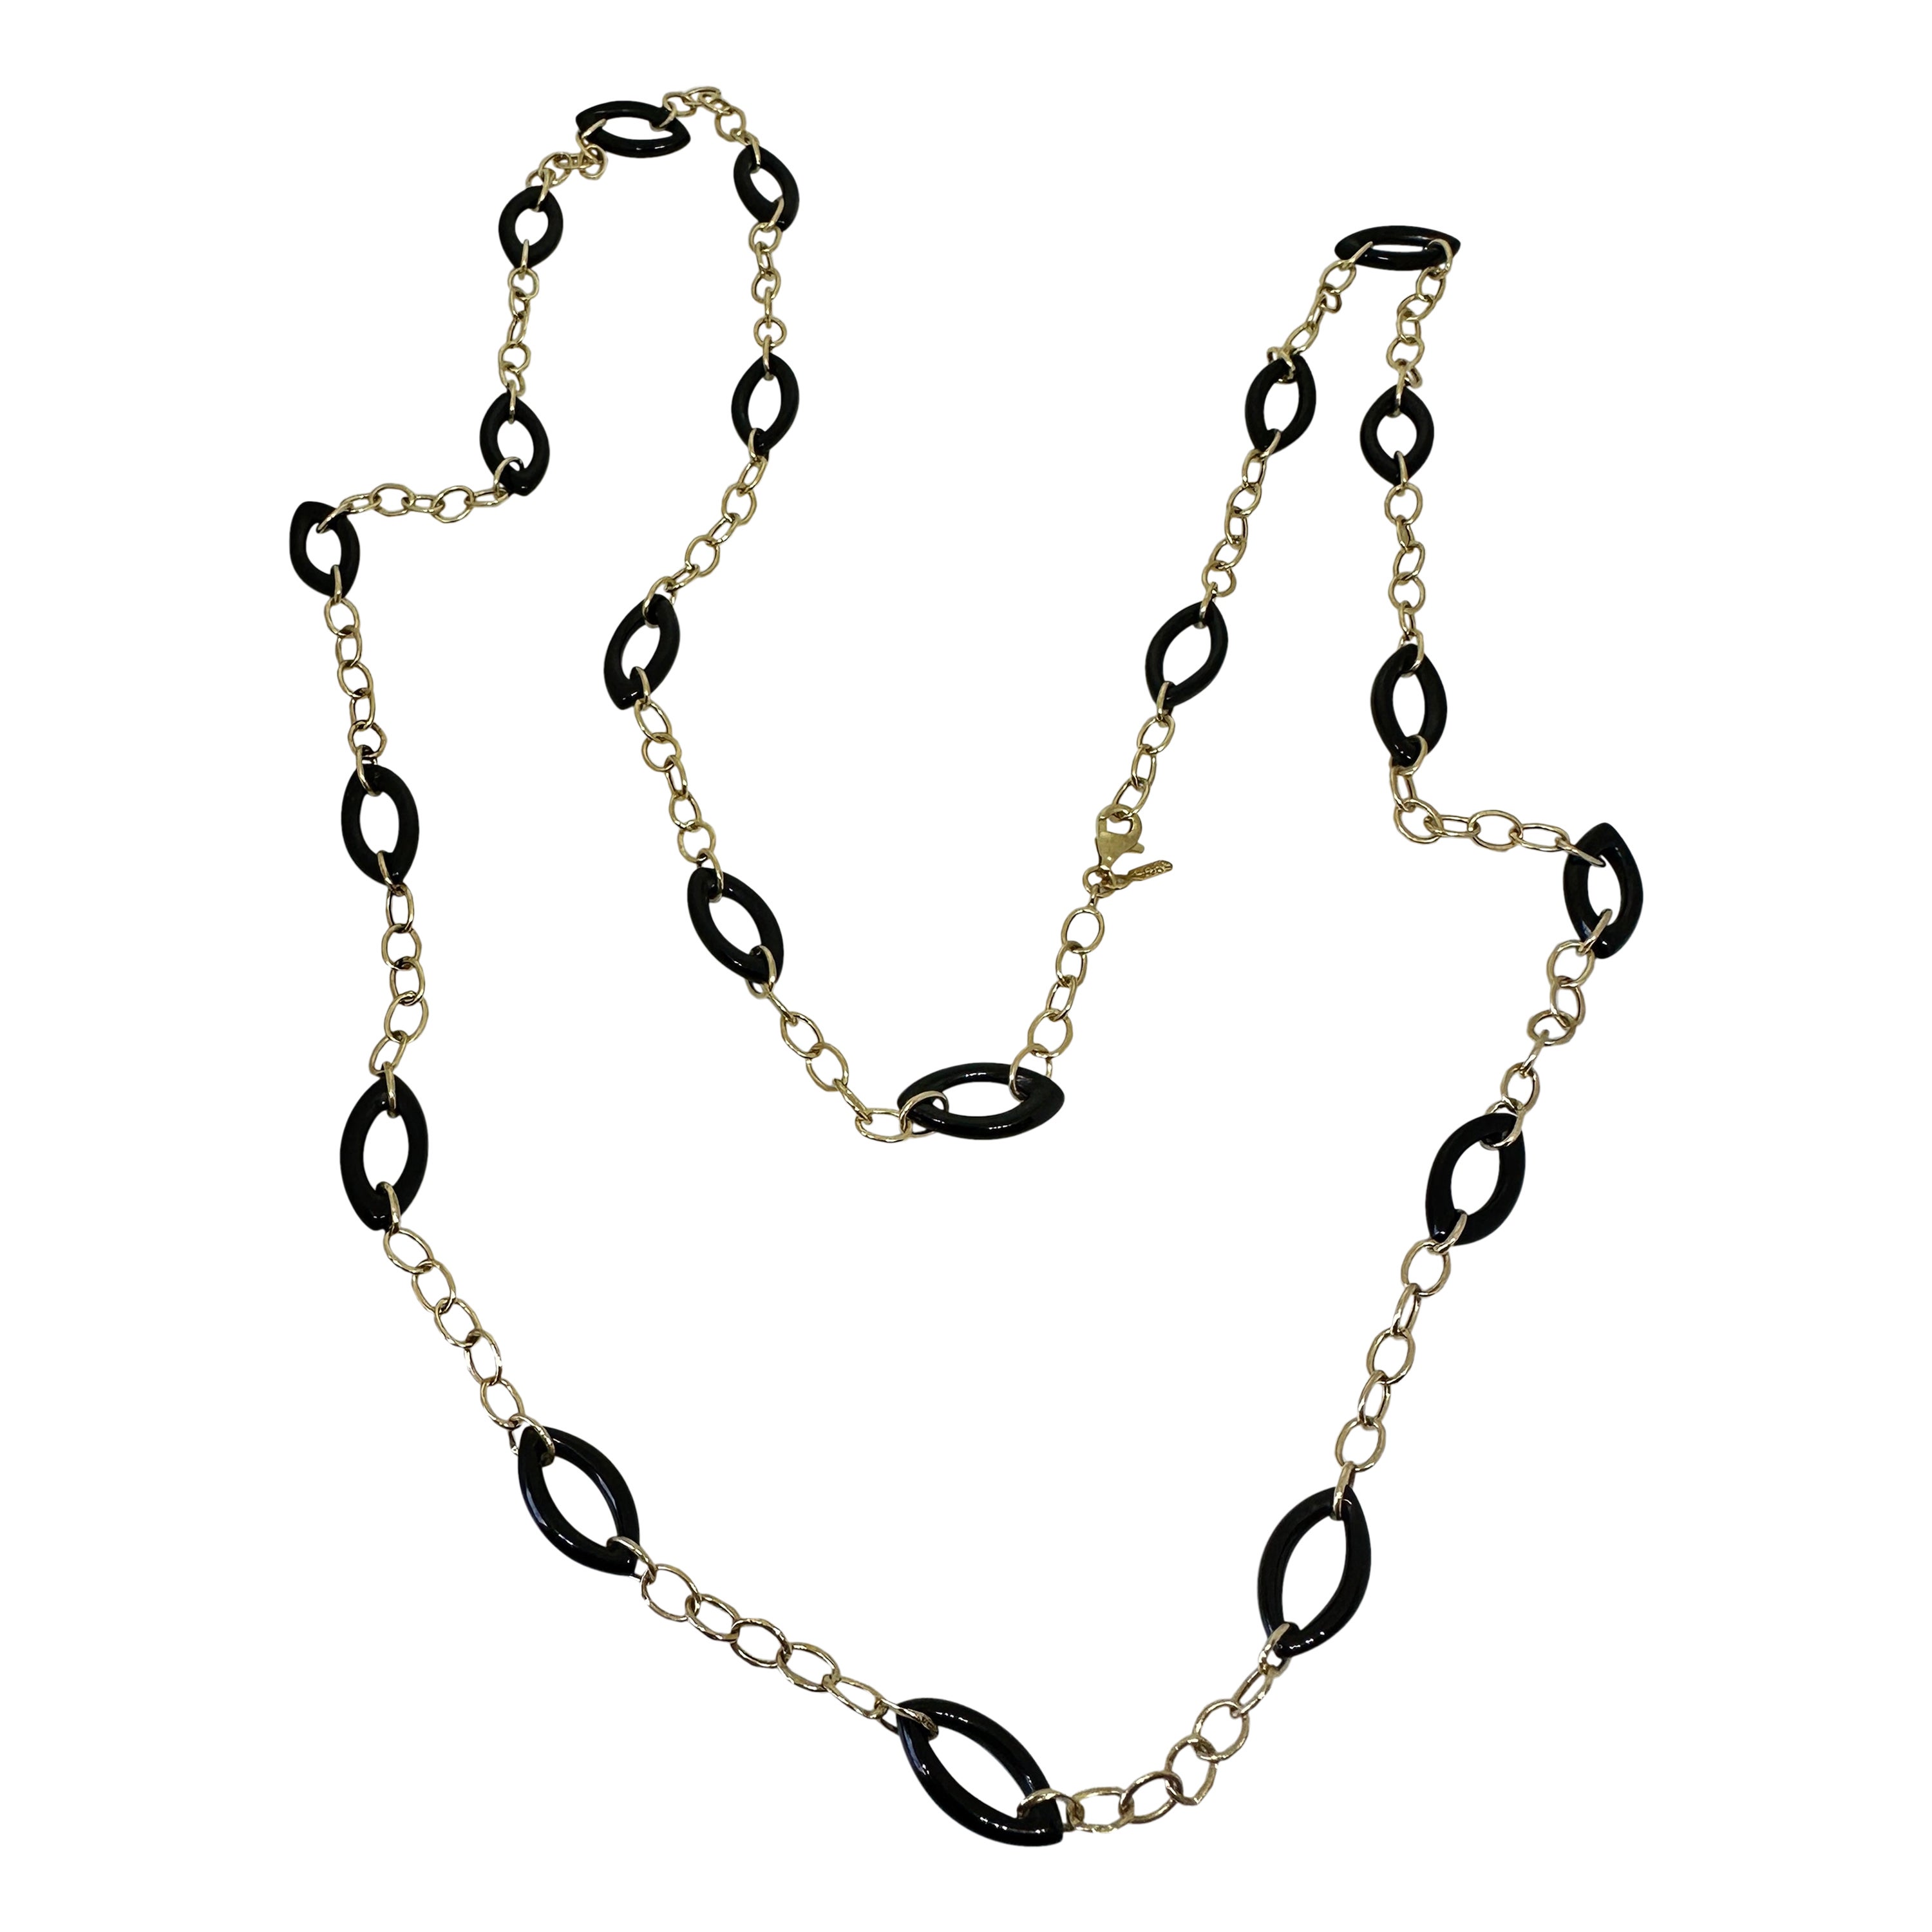 Black Coral 14 Karat Gold Necklace 36 Inches Chain Link Necklace For Sale